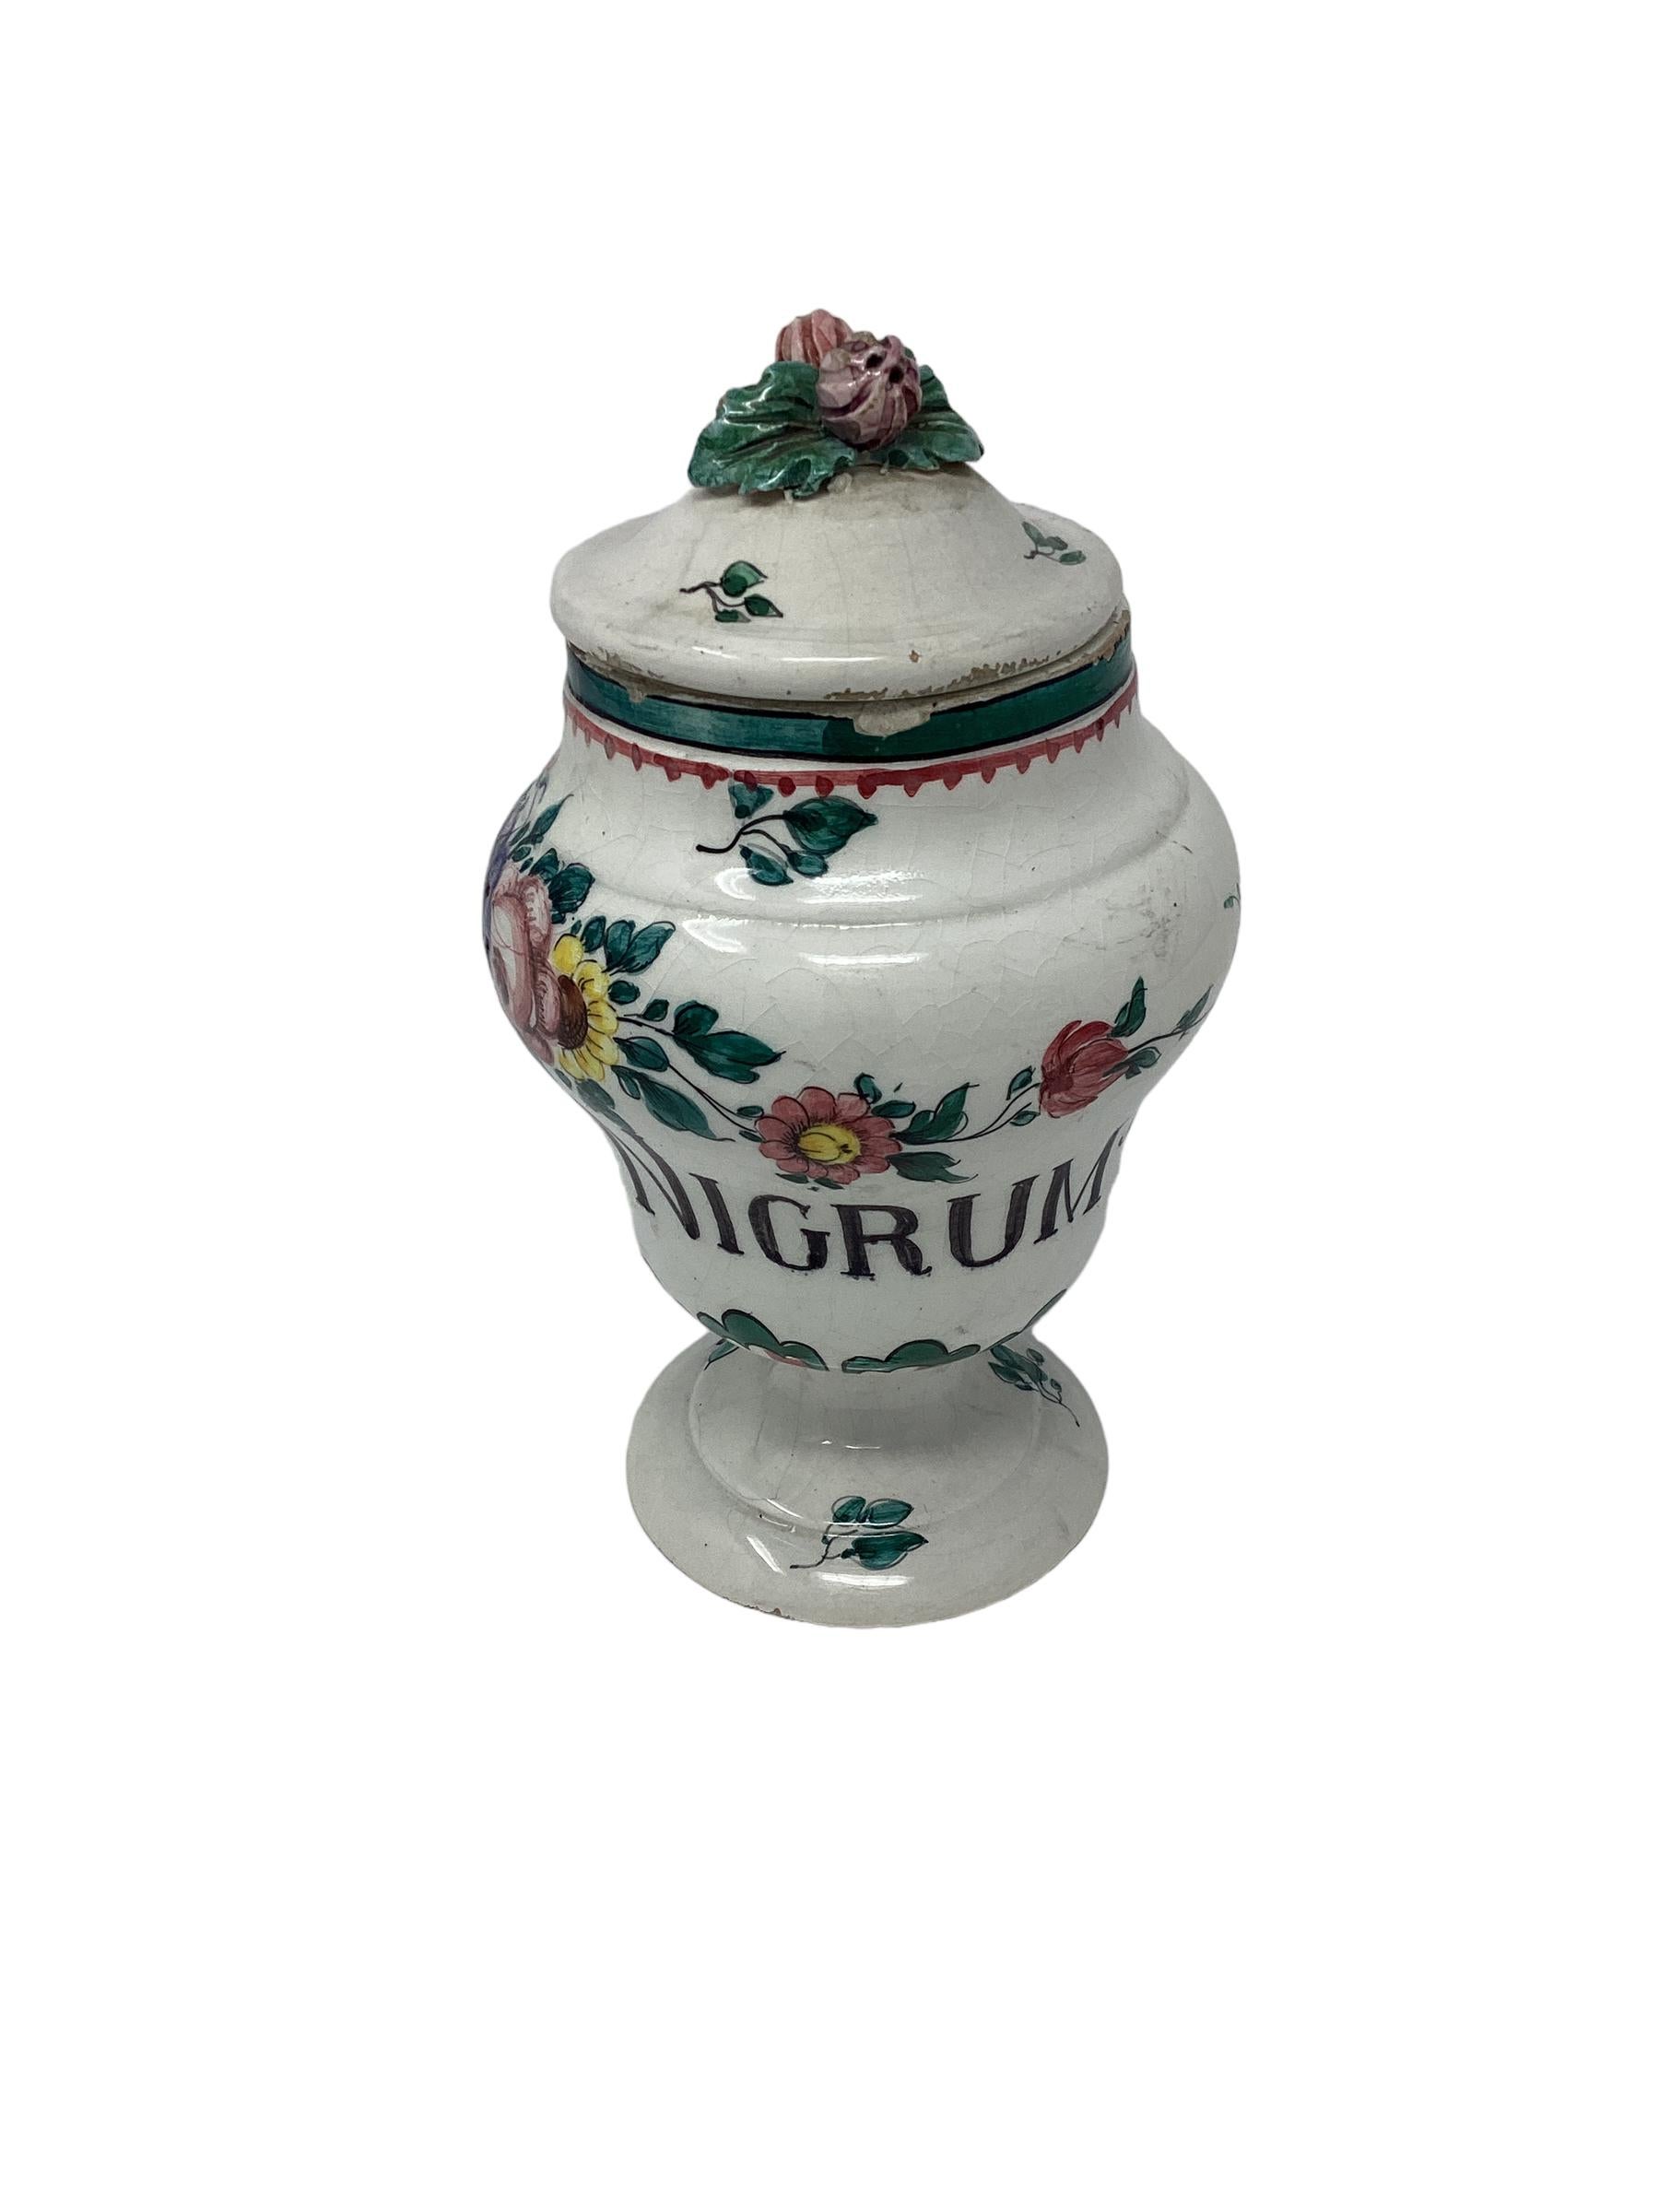 19th Century Italian Faience Floral Decorated Apothecary Jars In Good Condition For Sale In Chapel Hill, NC